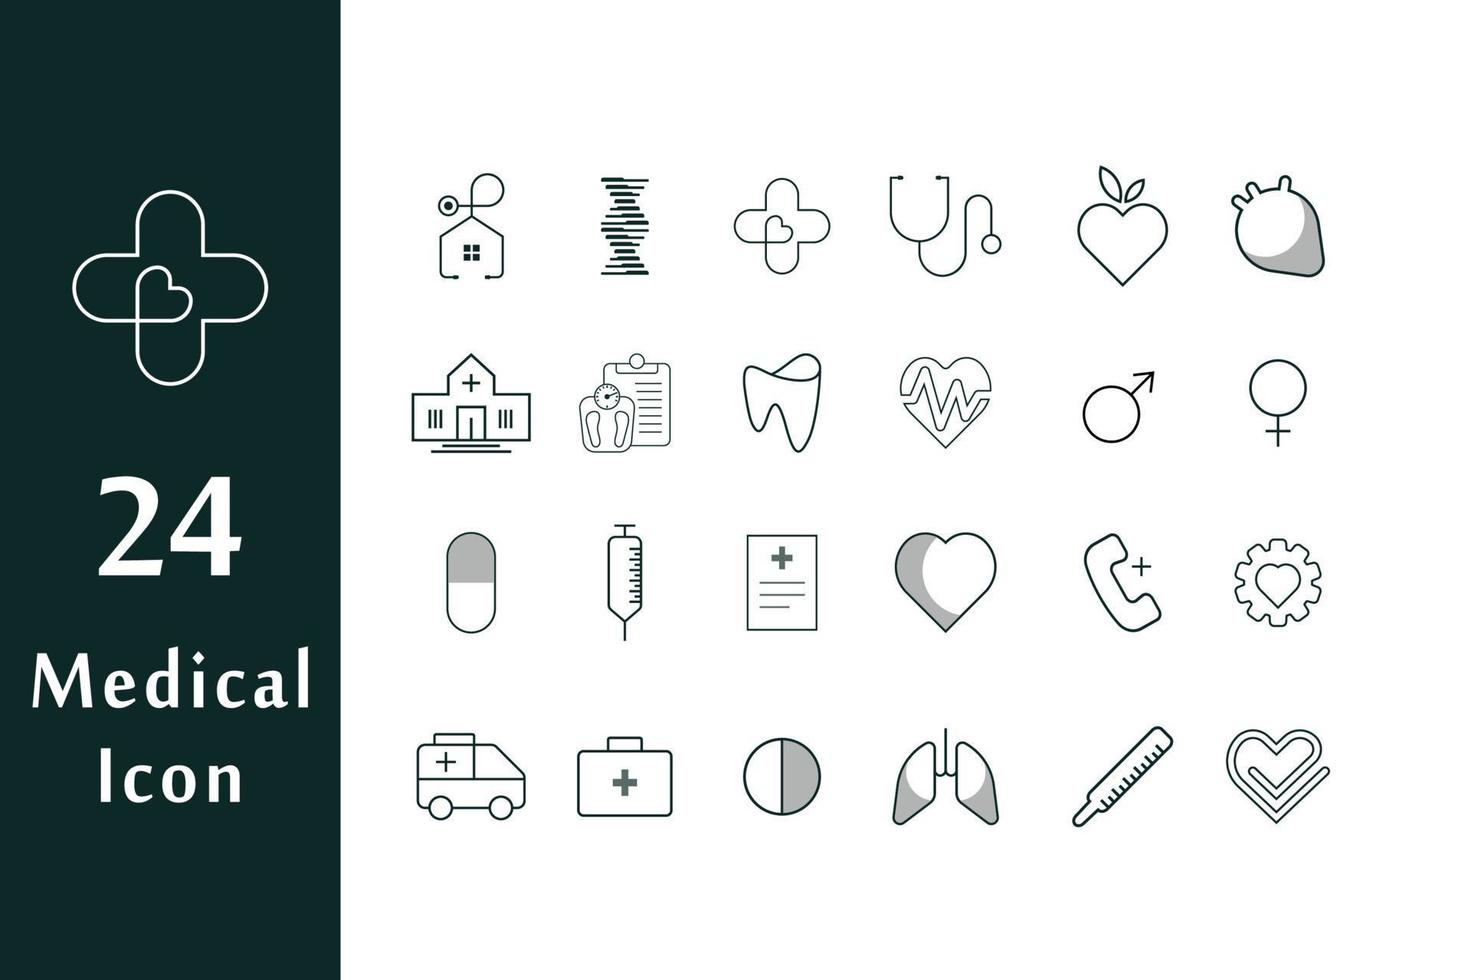 Medical icons, hospital, stethoscope, lung, heart, ambulance vector